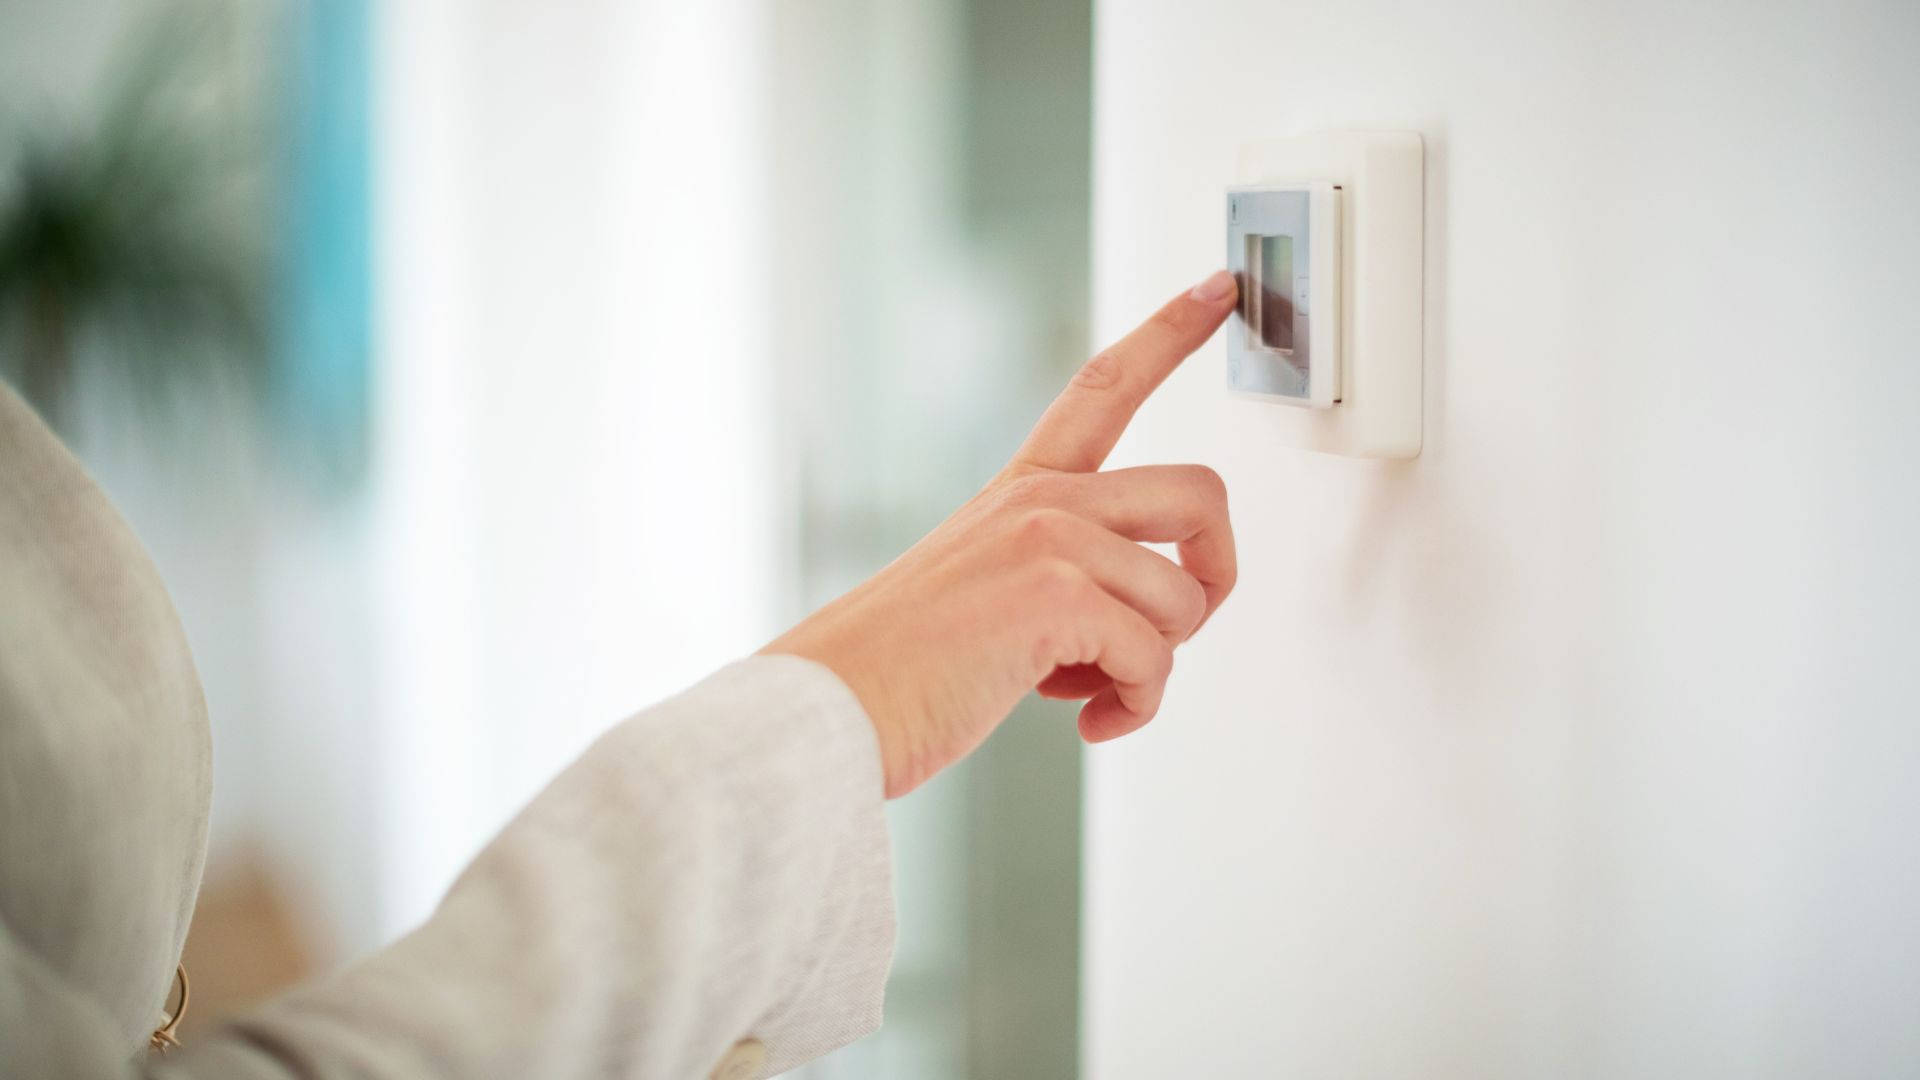 Human hand interacting with a classic light switch Wallpaper